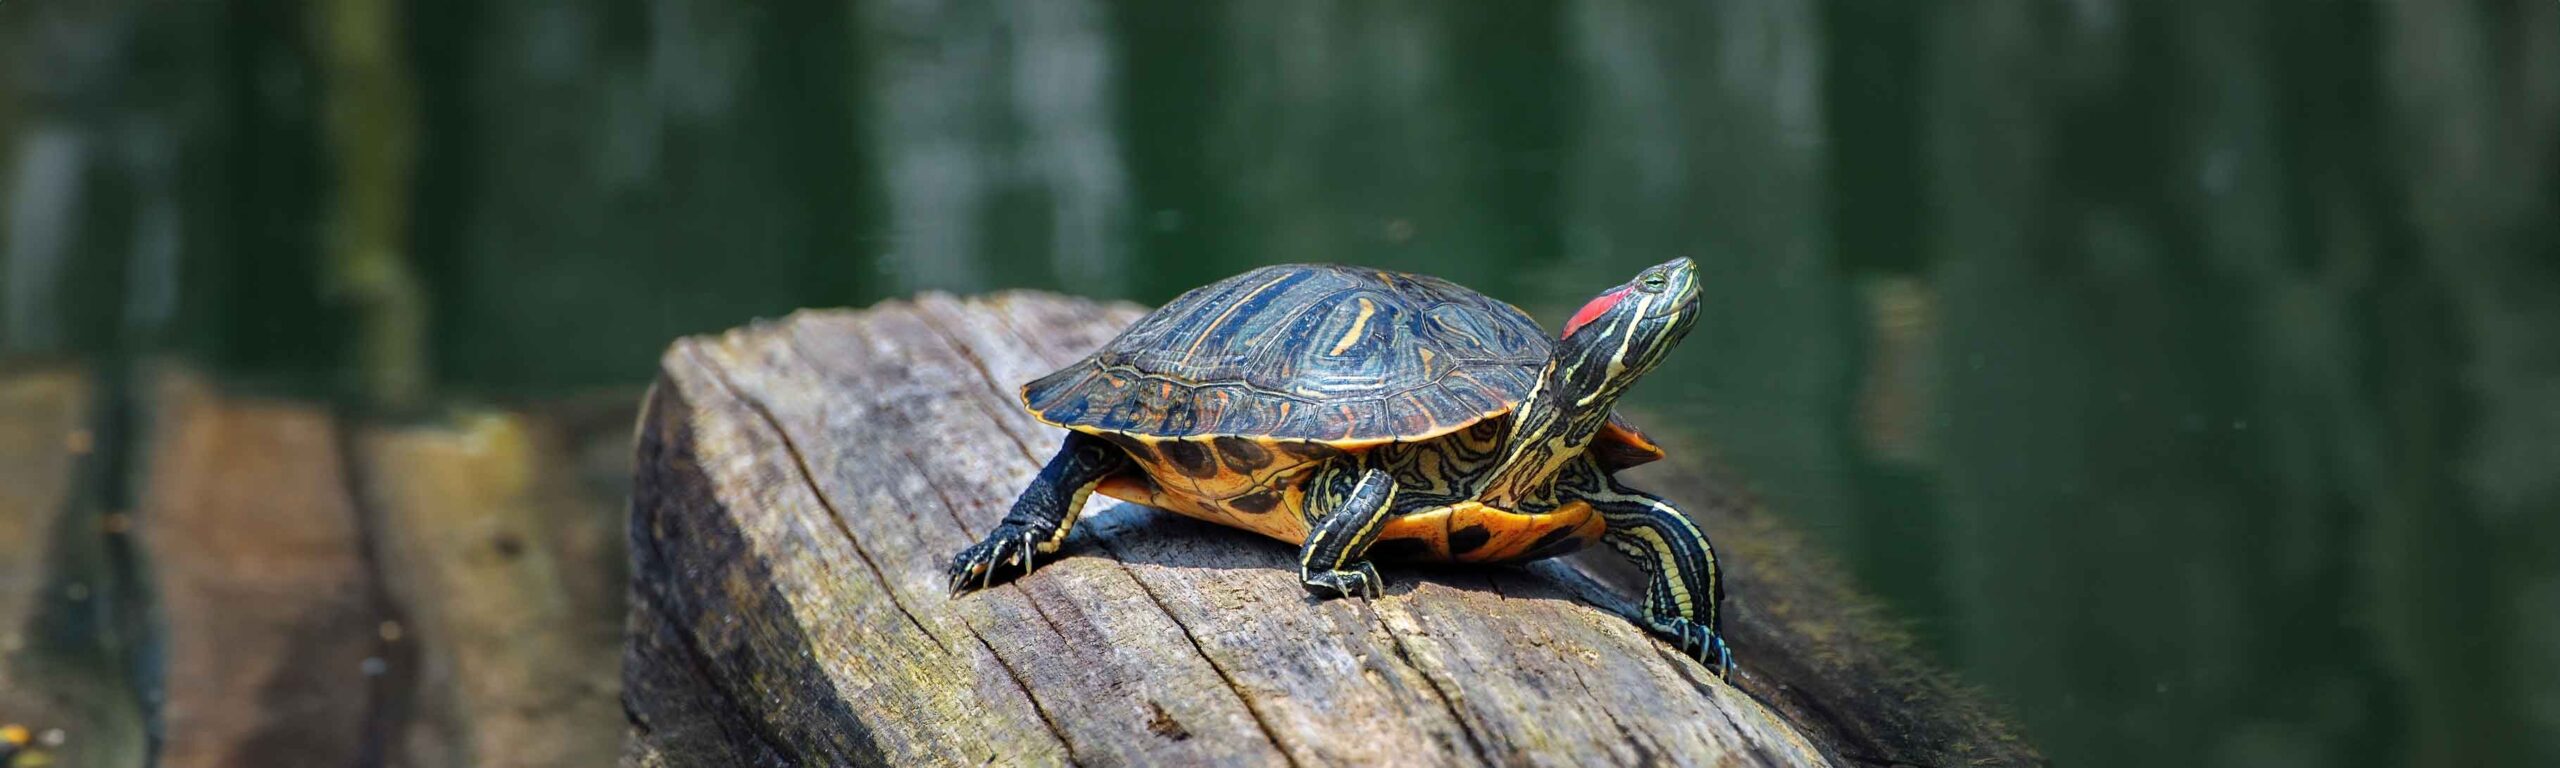 a cooter turtle sunning on a log